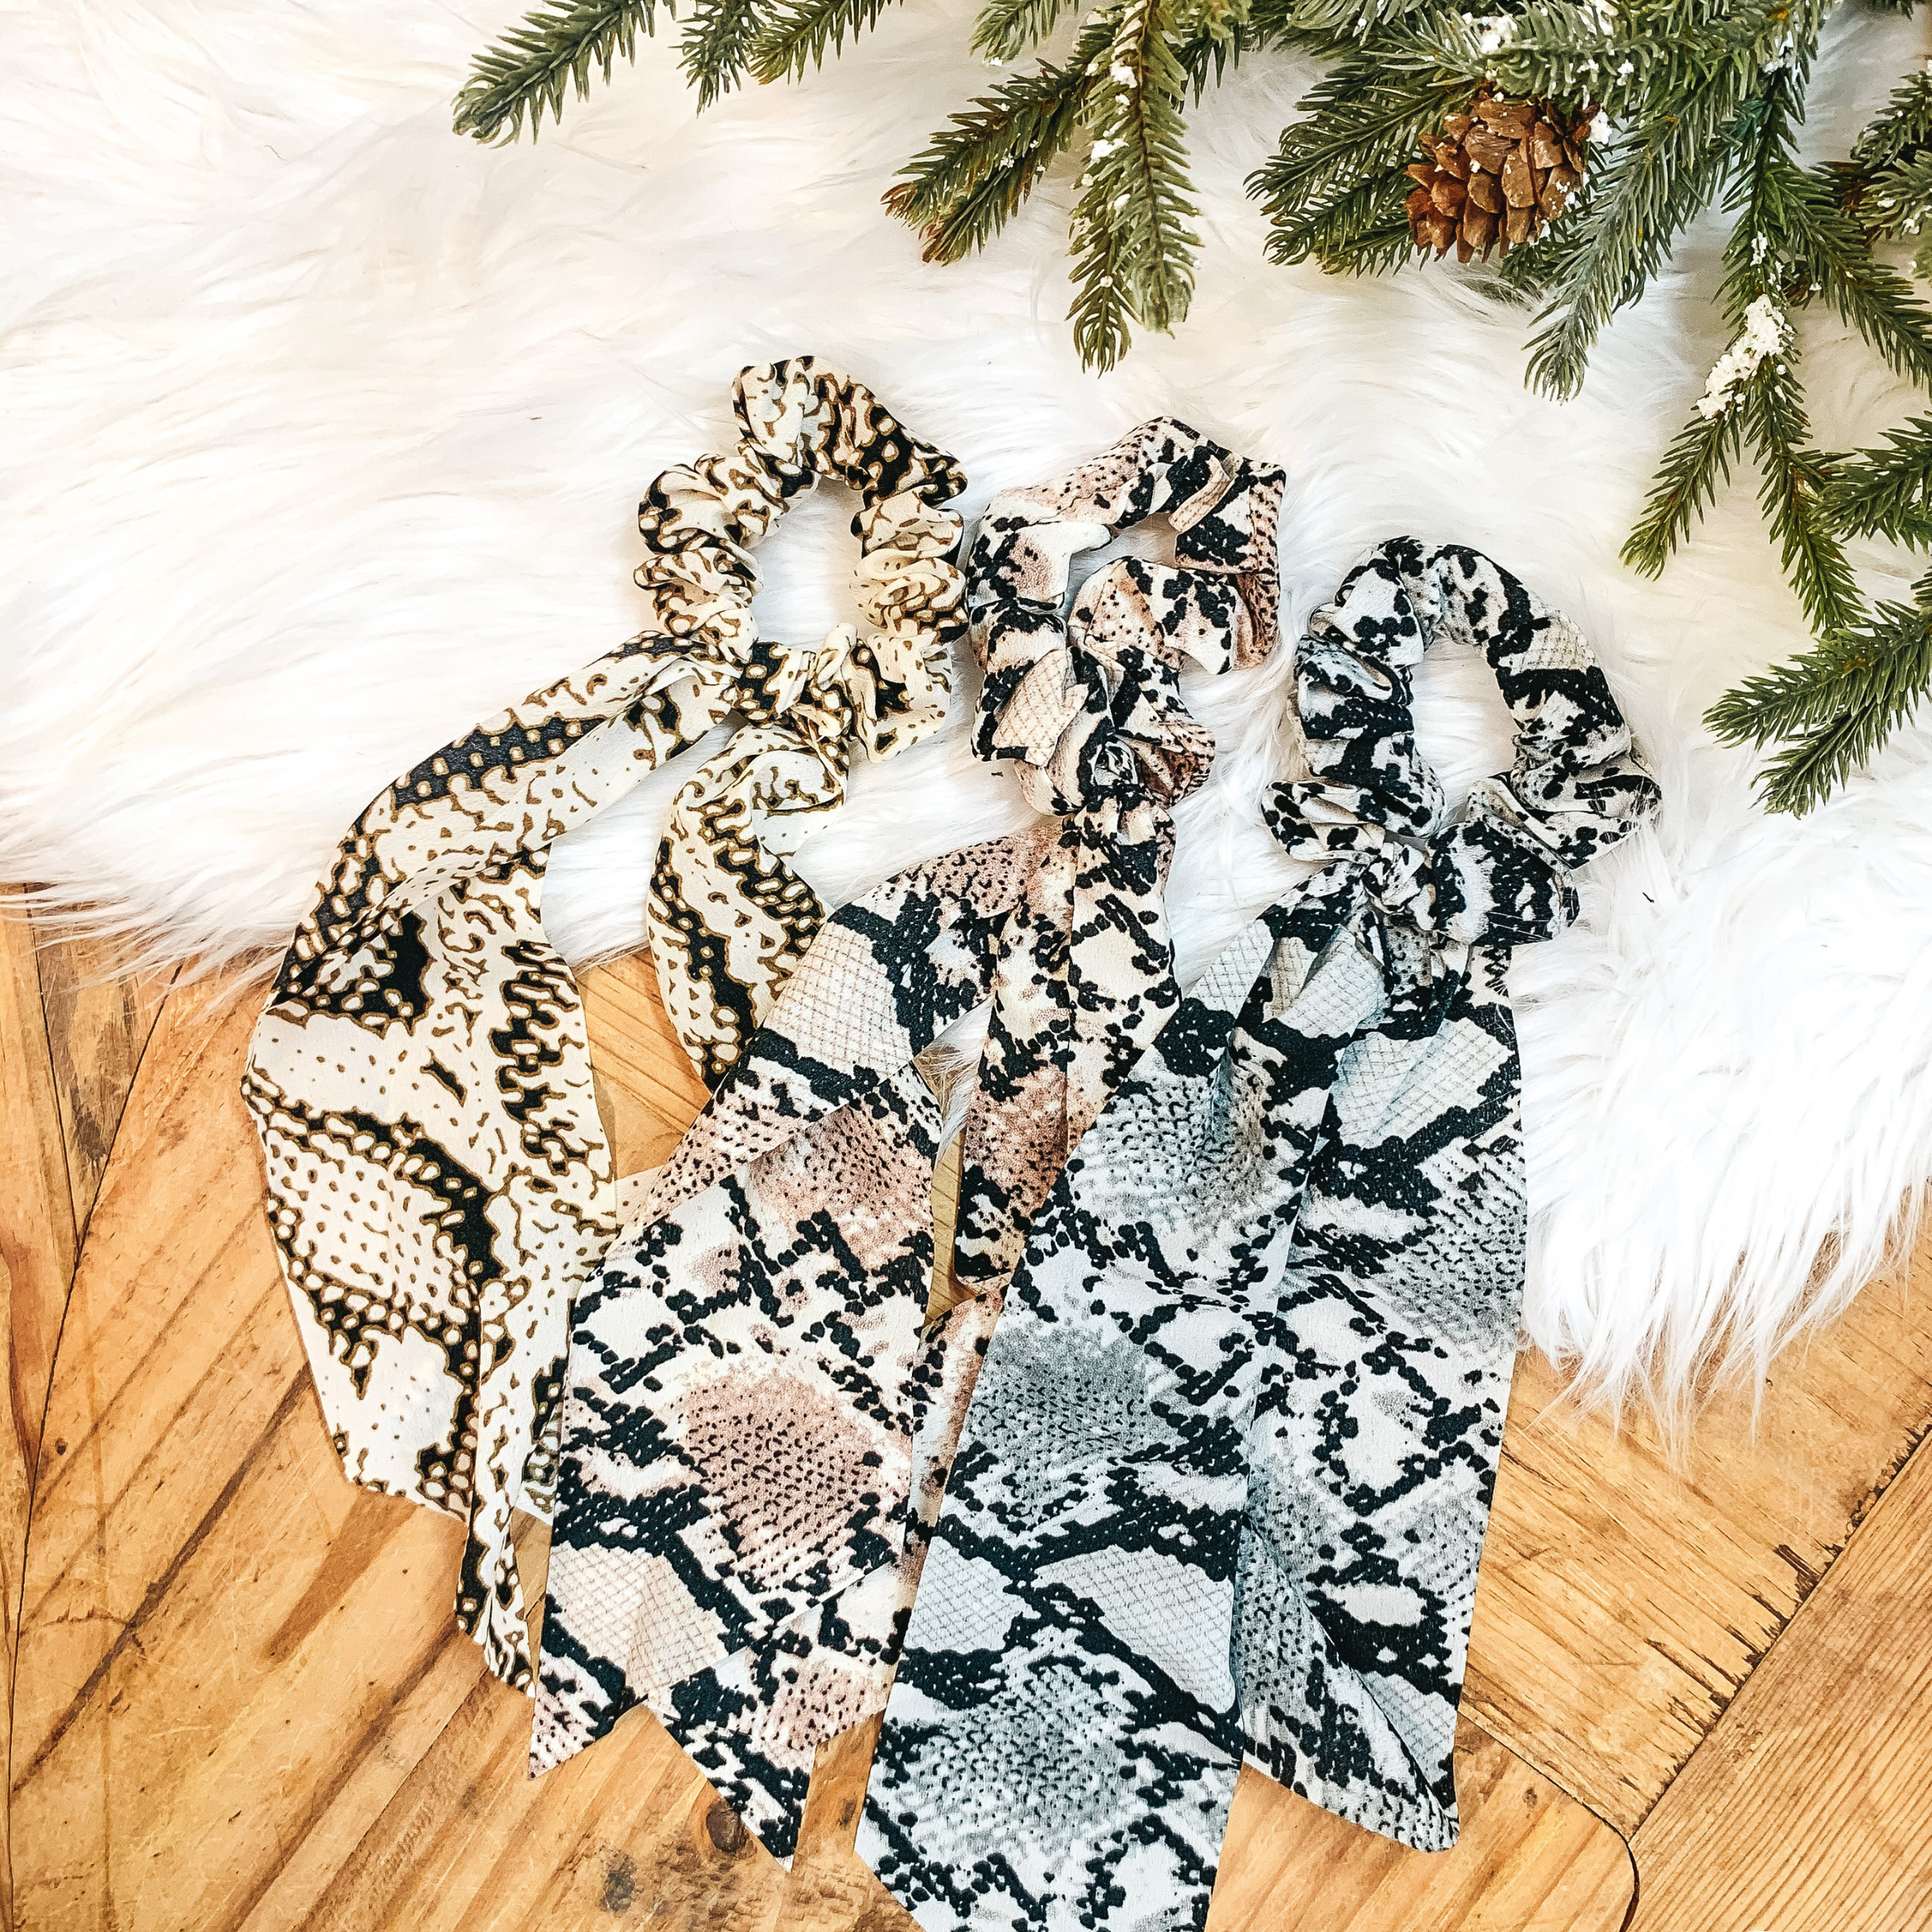 Buy 3 for $10 | Snakeskin Scrunchie with Tie - Giddy Up Glamour Boutique